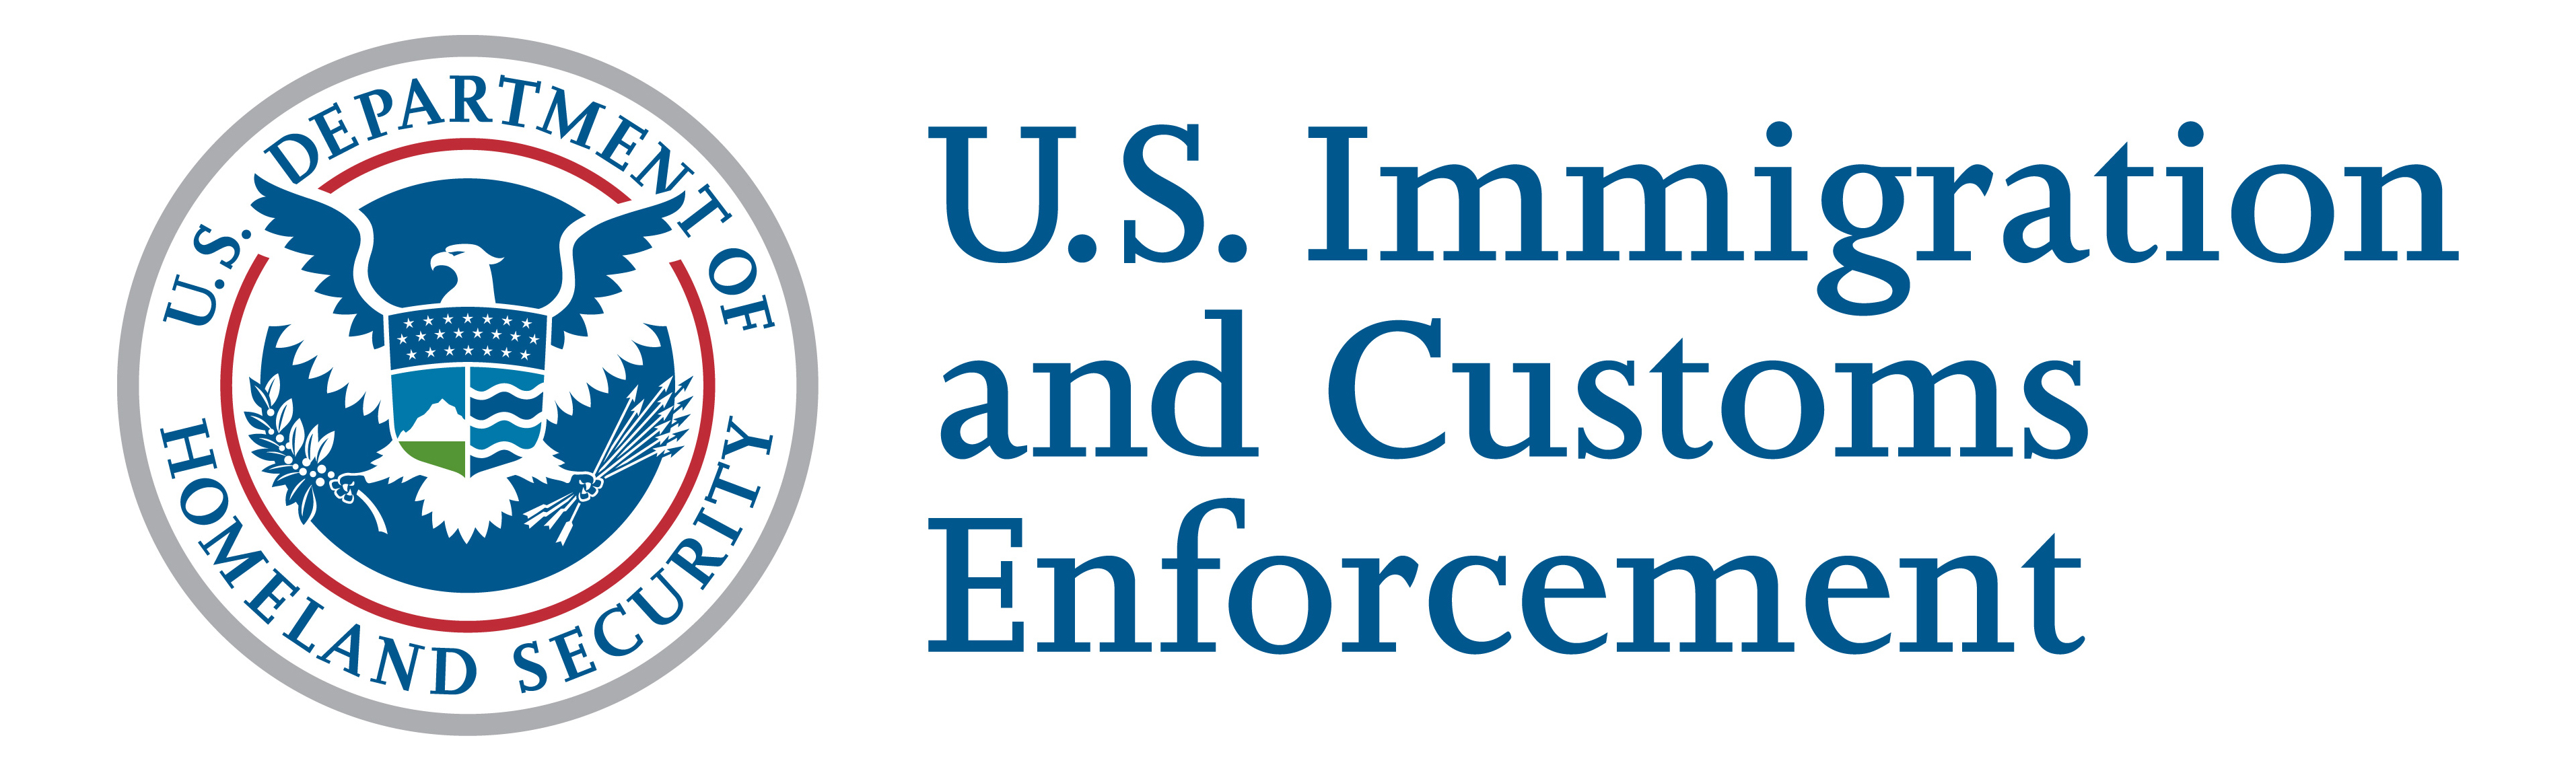 U.S. Immigration and Customs Enforcement next to the seal of the U.S. Department of Homeland Security.